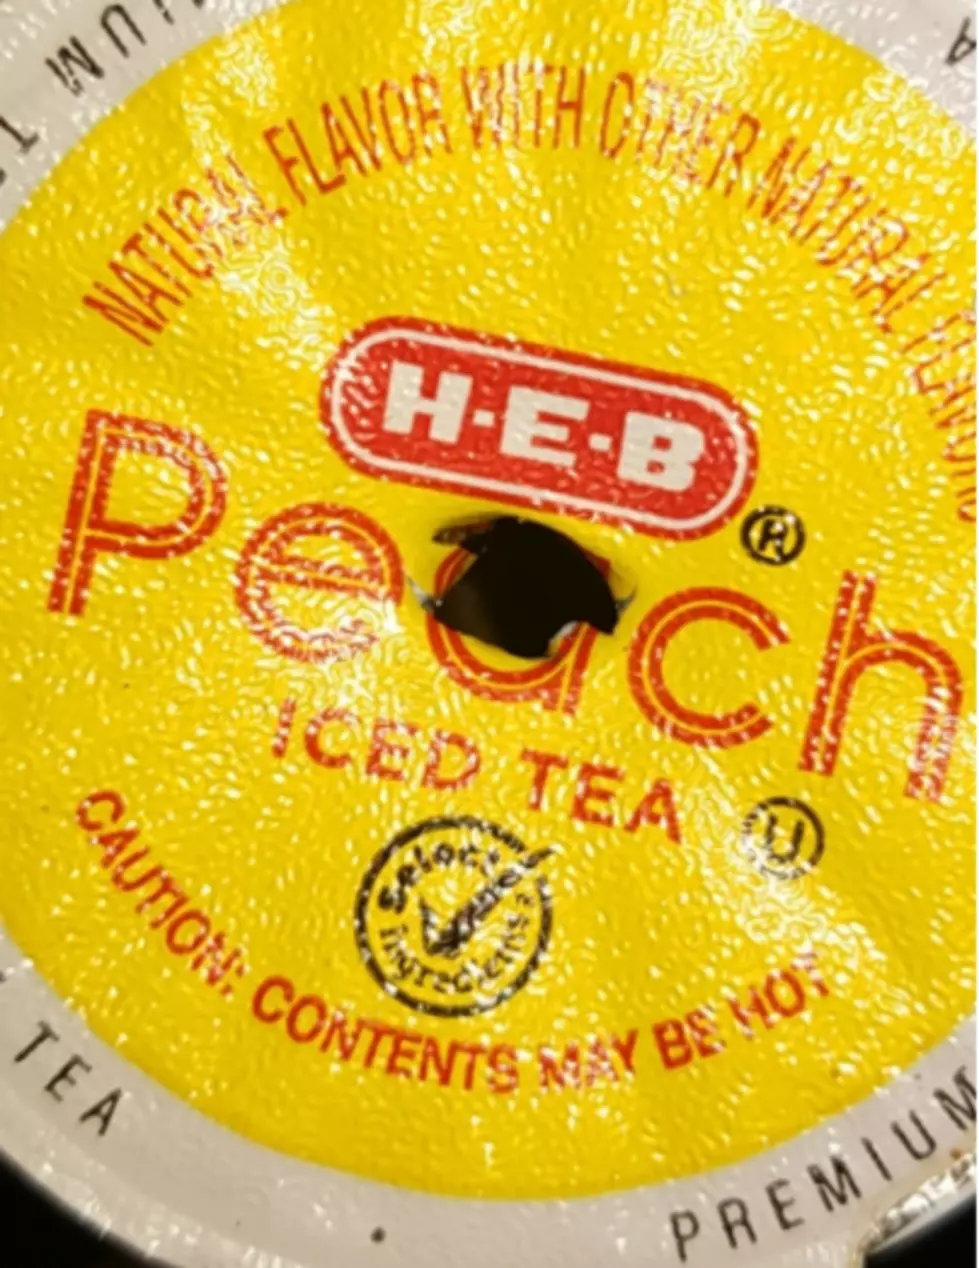 I Don’t Care For Flavored Teas But This One….Yum!